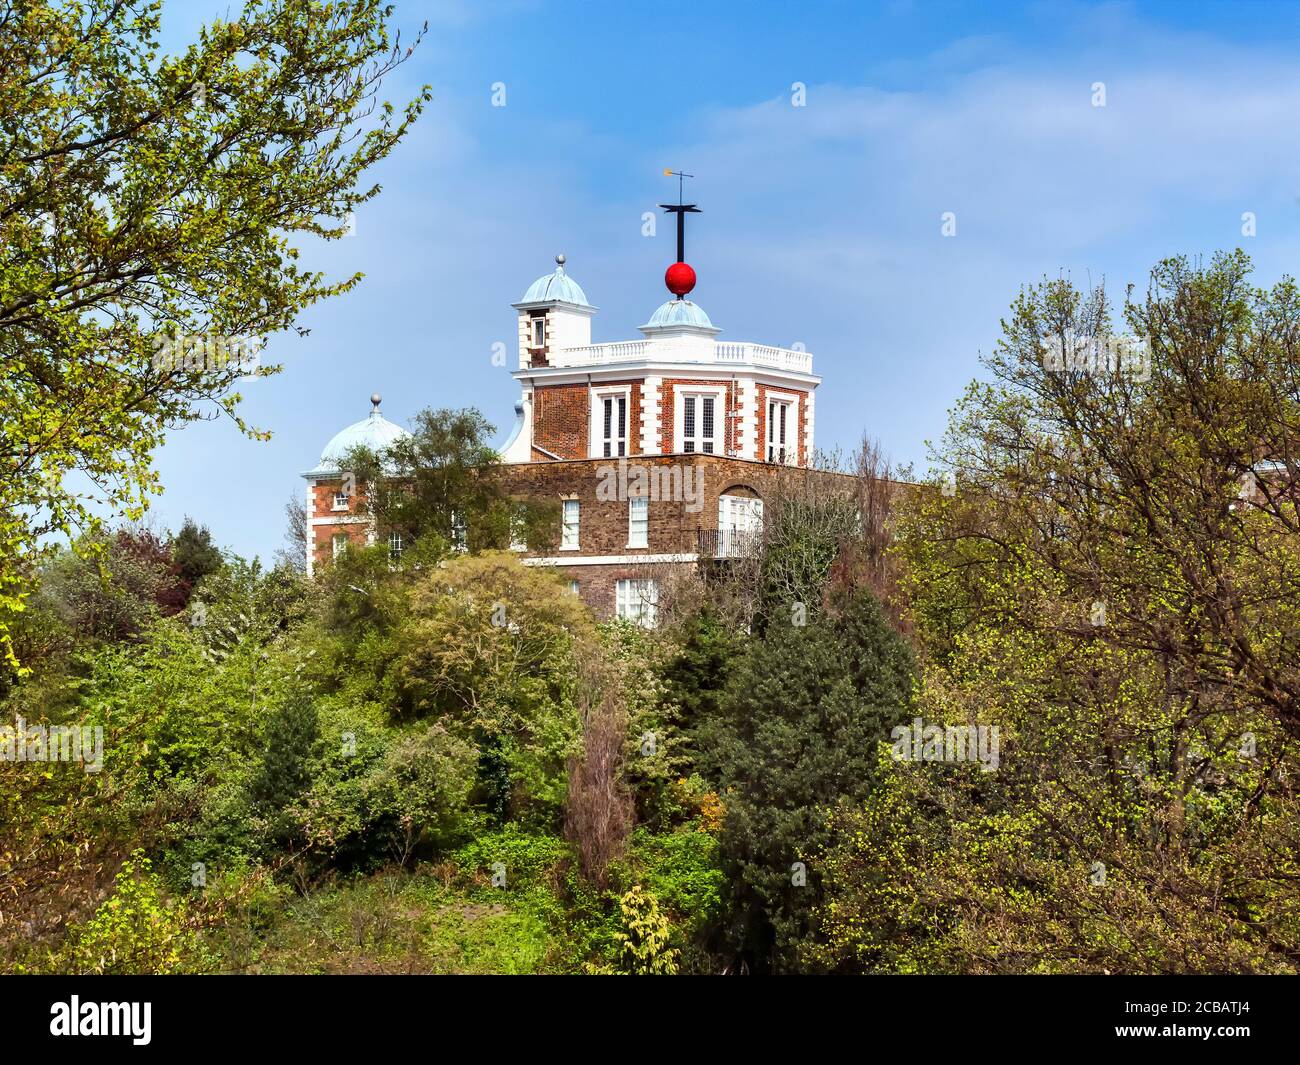 The Octagon Room of the Royal Observatory museum in Greenwich built by Sir Christopher Wren in the 17th century which is a popular travel destination Stock Photo